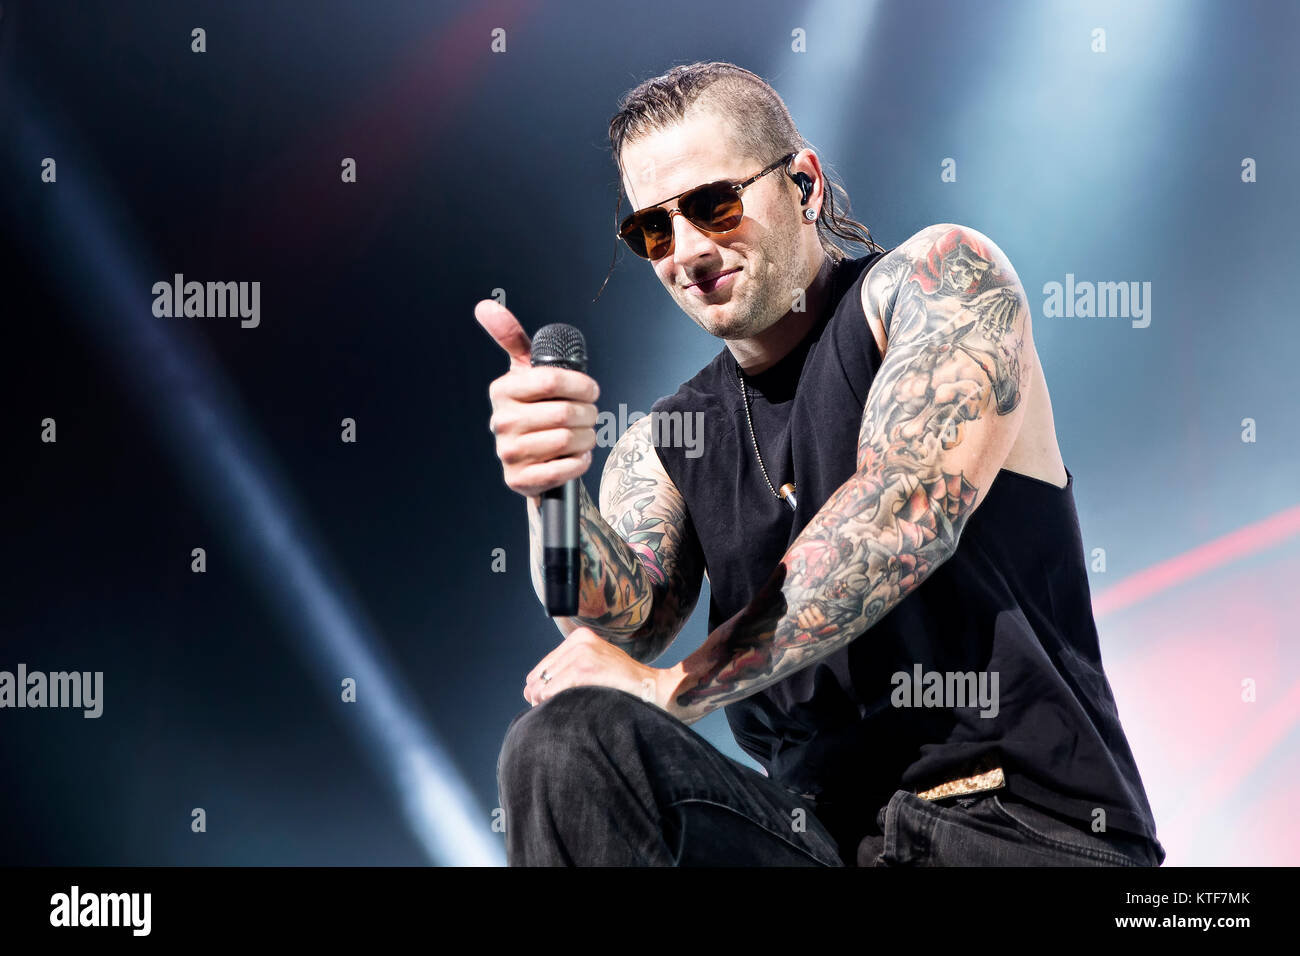 The American heavy metal band Avenged Sevenfold performs a live concert at Oslo Spektrum in Oslo. Here vocalist M. Shadows is seen live on stage. Norway, 09/11 2013. Stock Photo